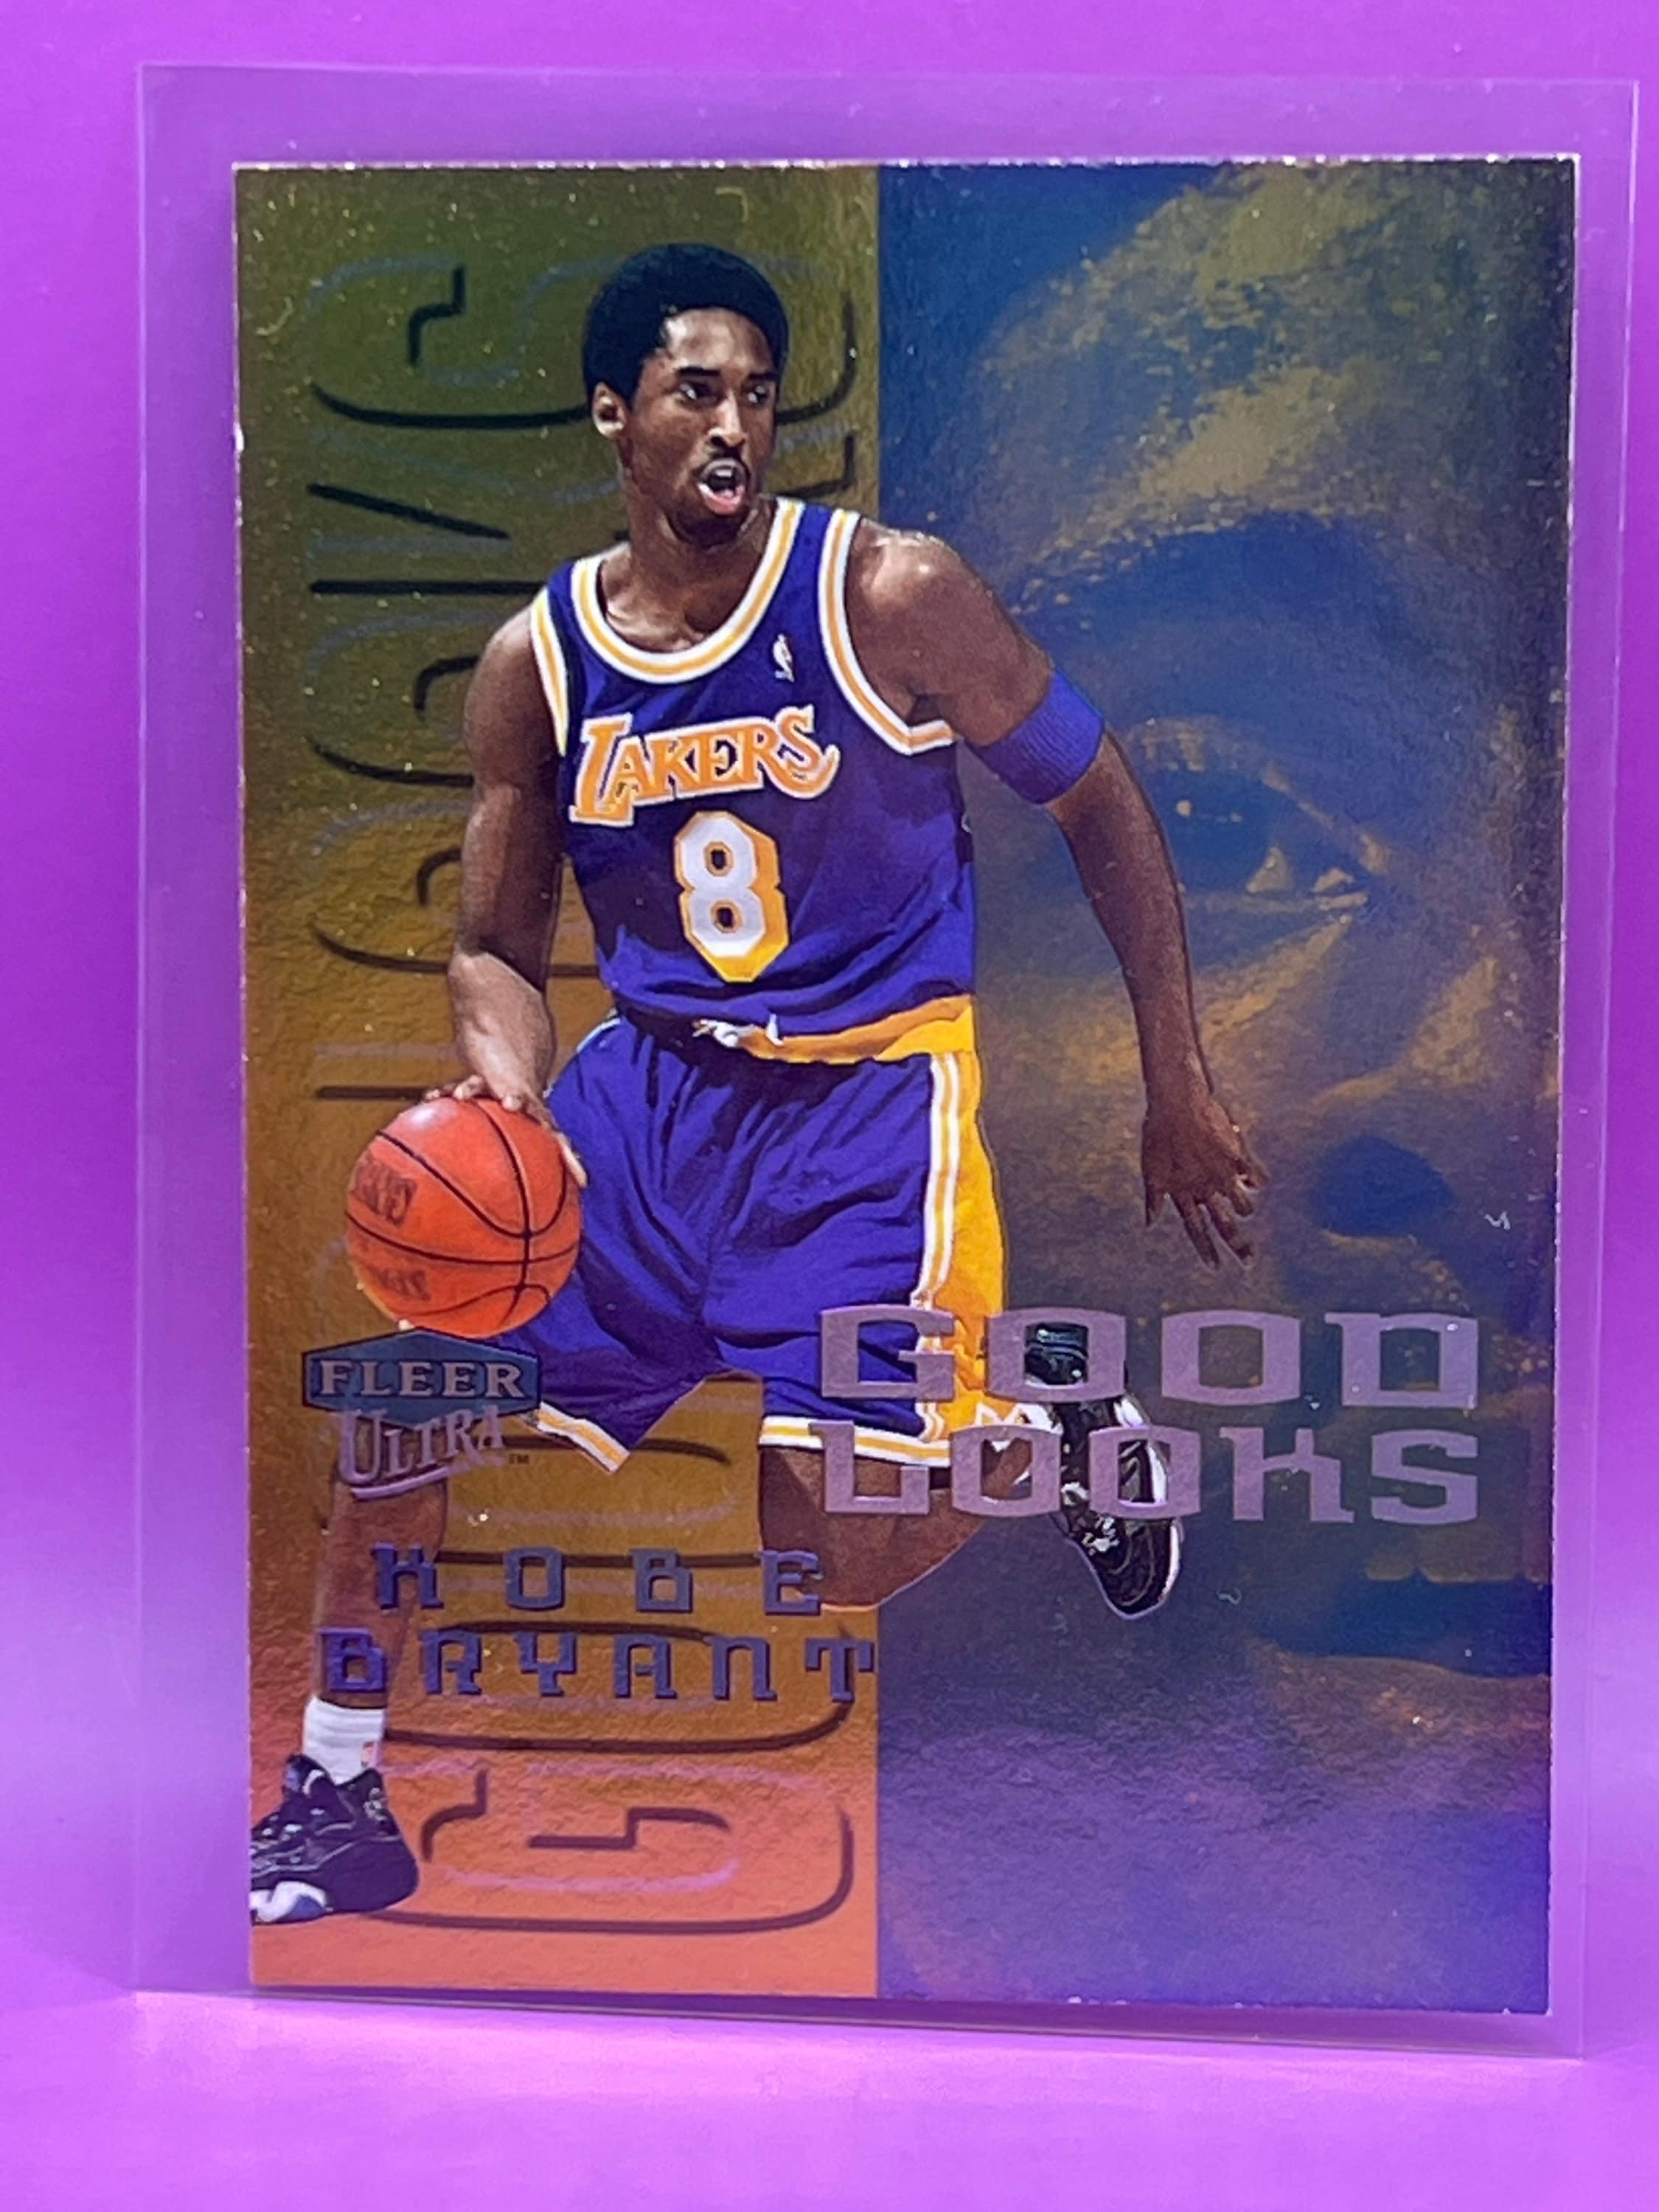 Rare Kobe Bryant card sells for a record $2 million - Los Angeles Times